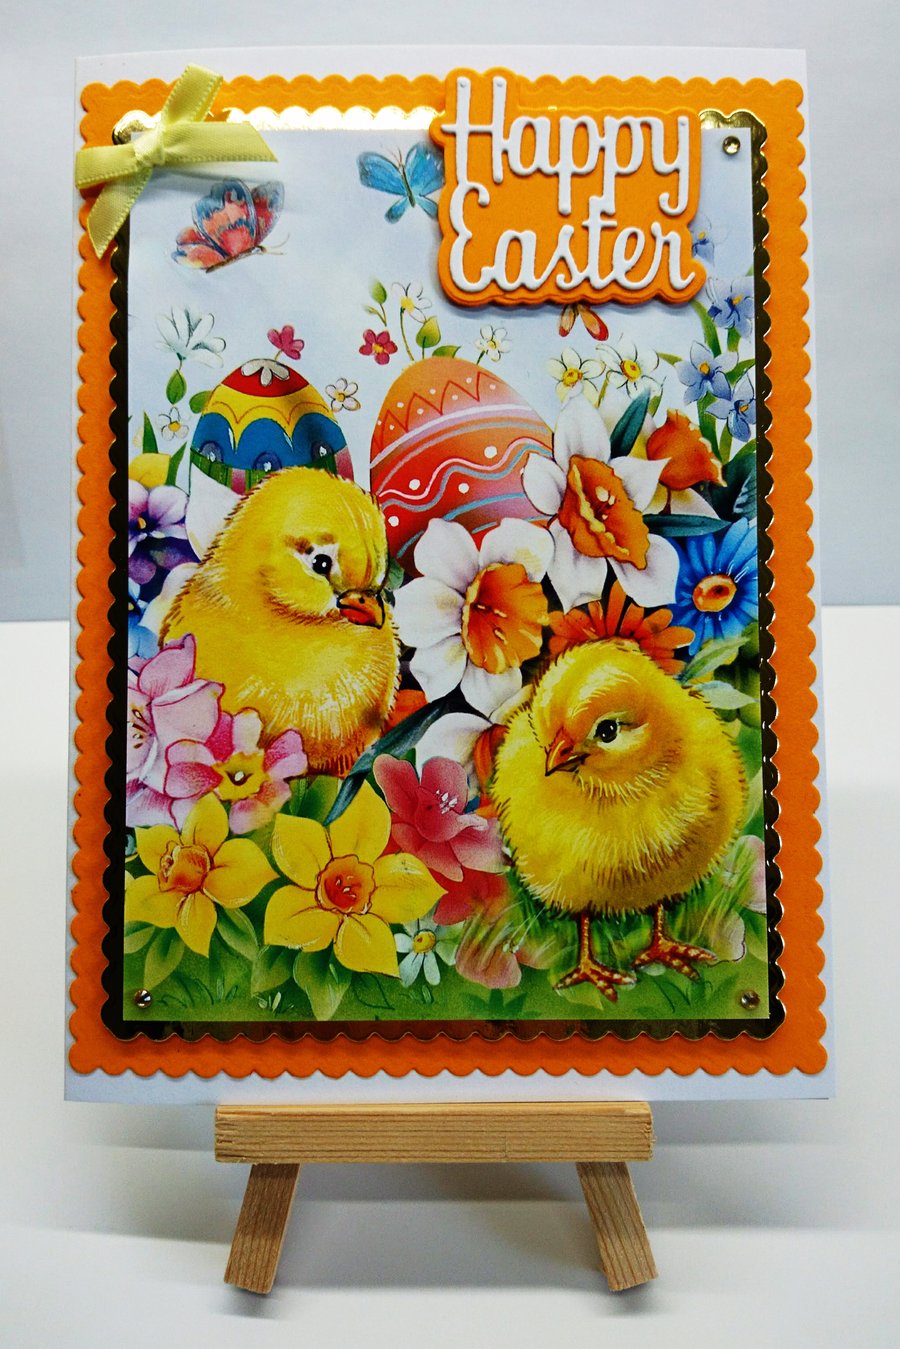 Happy Easter Card Chicks with Daffodils Eggs Spring Flowers